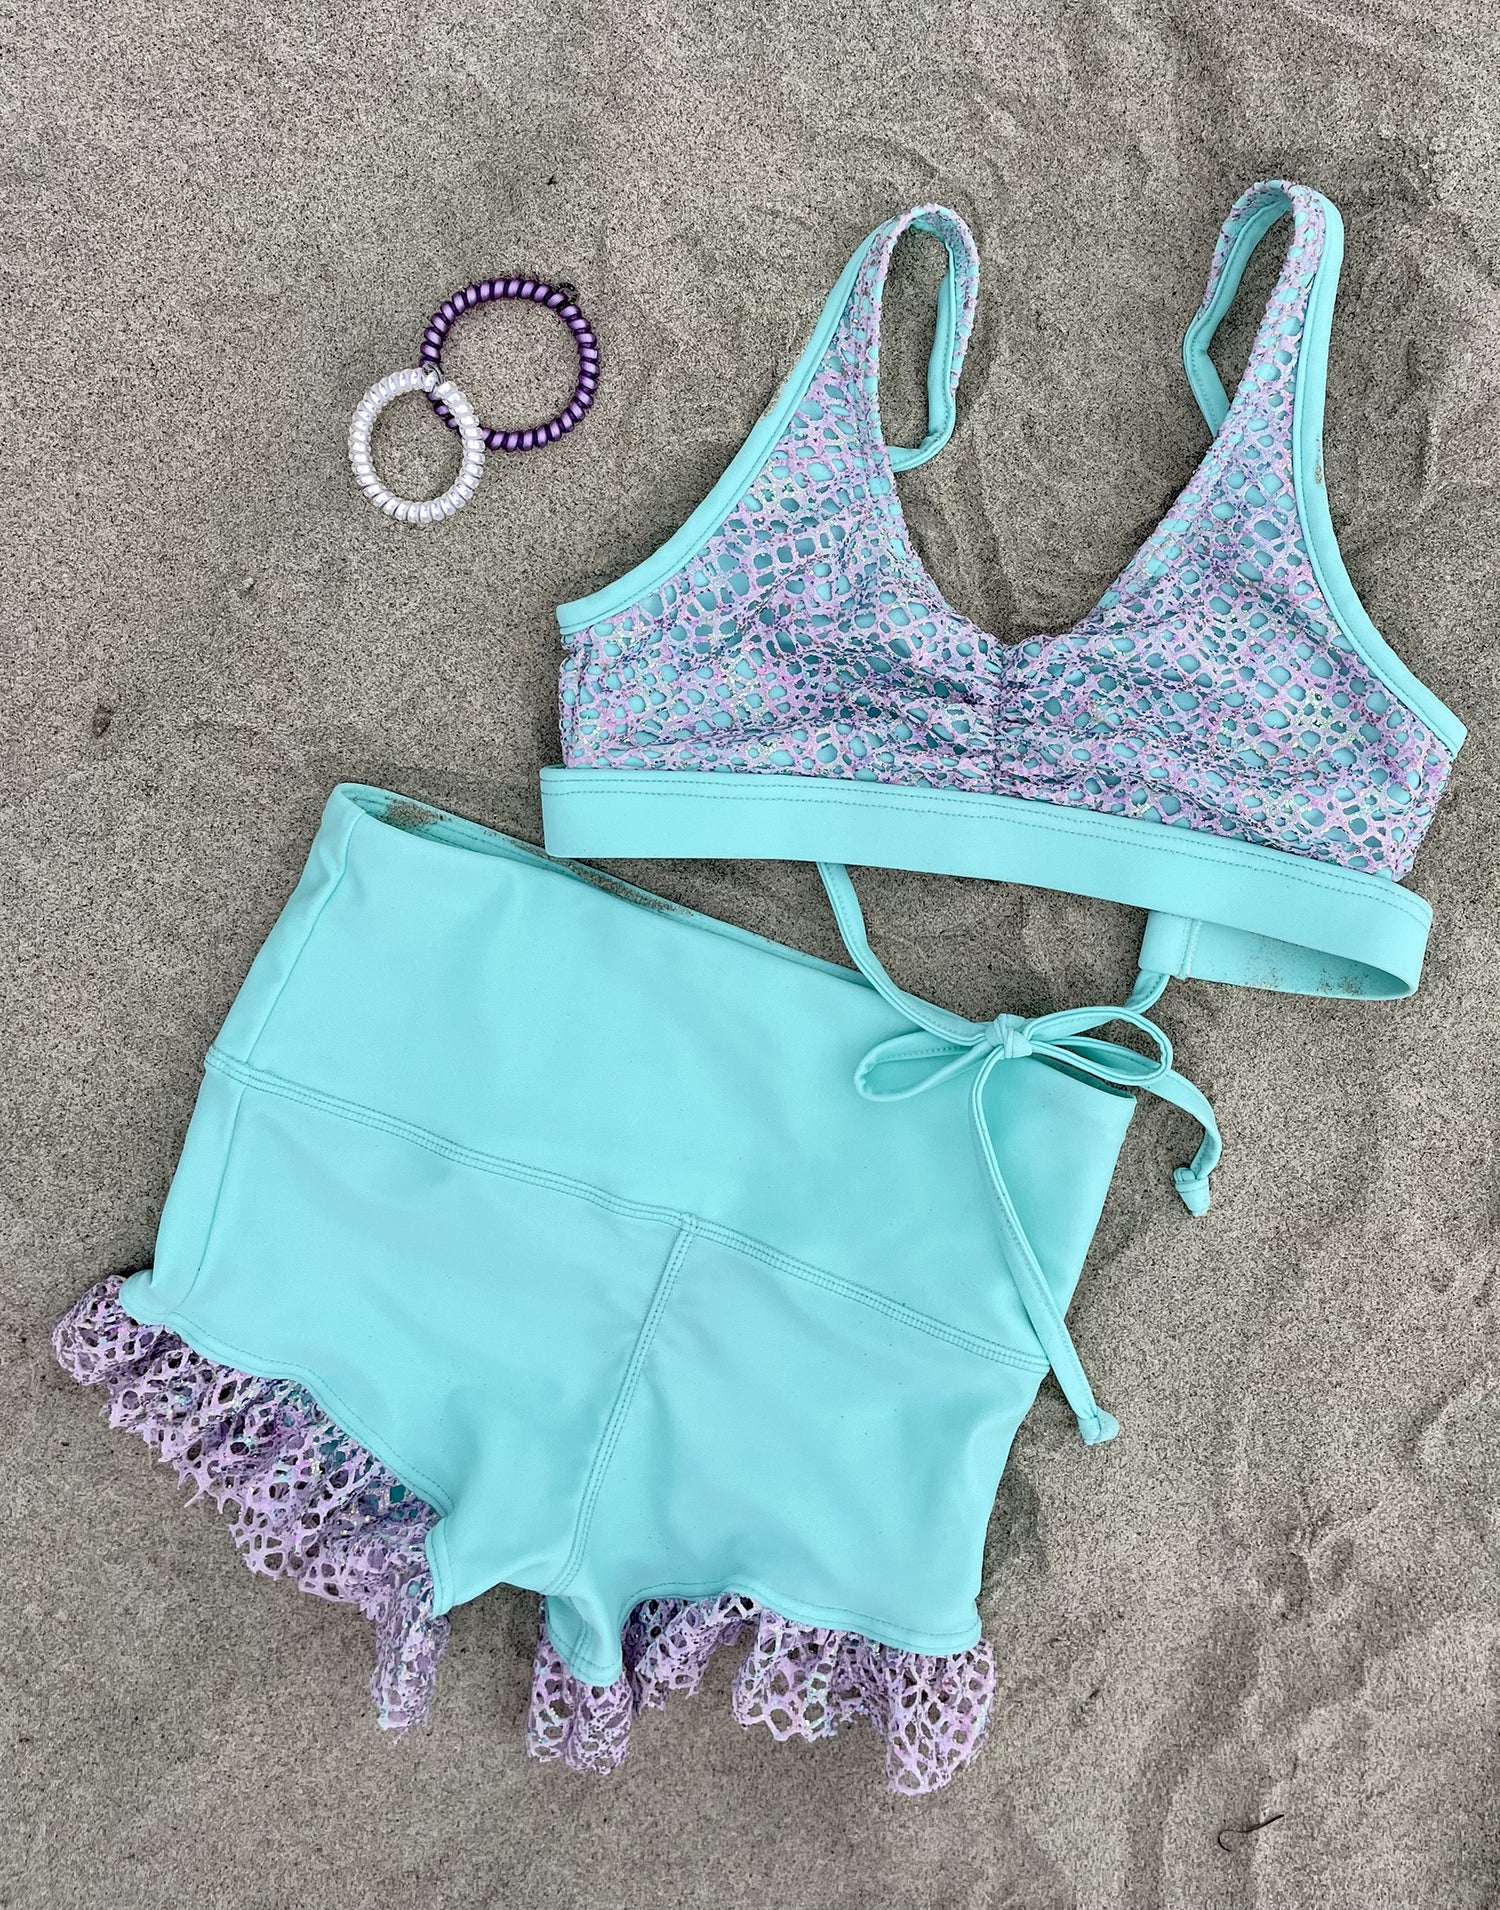 Dallas Bralette Active Top in Aqua with Wide Net Mesh Overlay - Product View